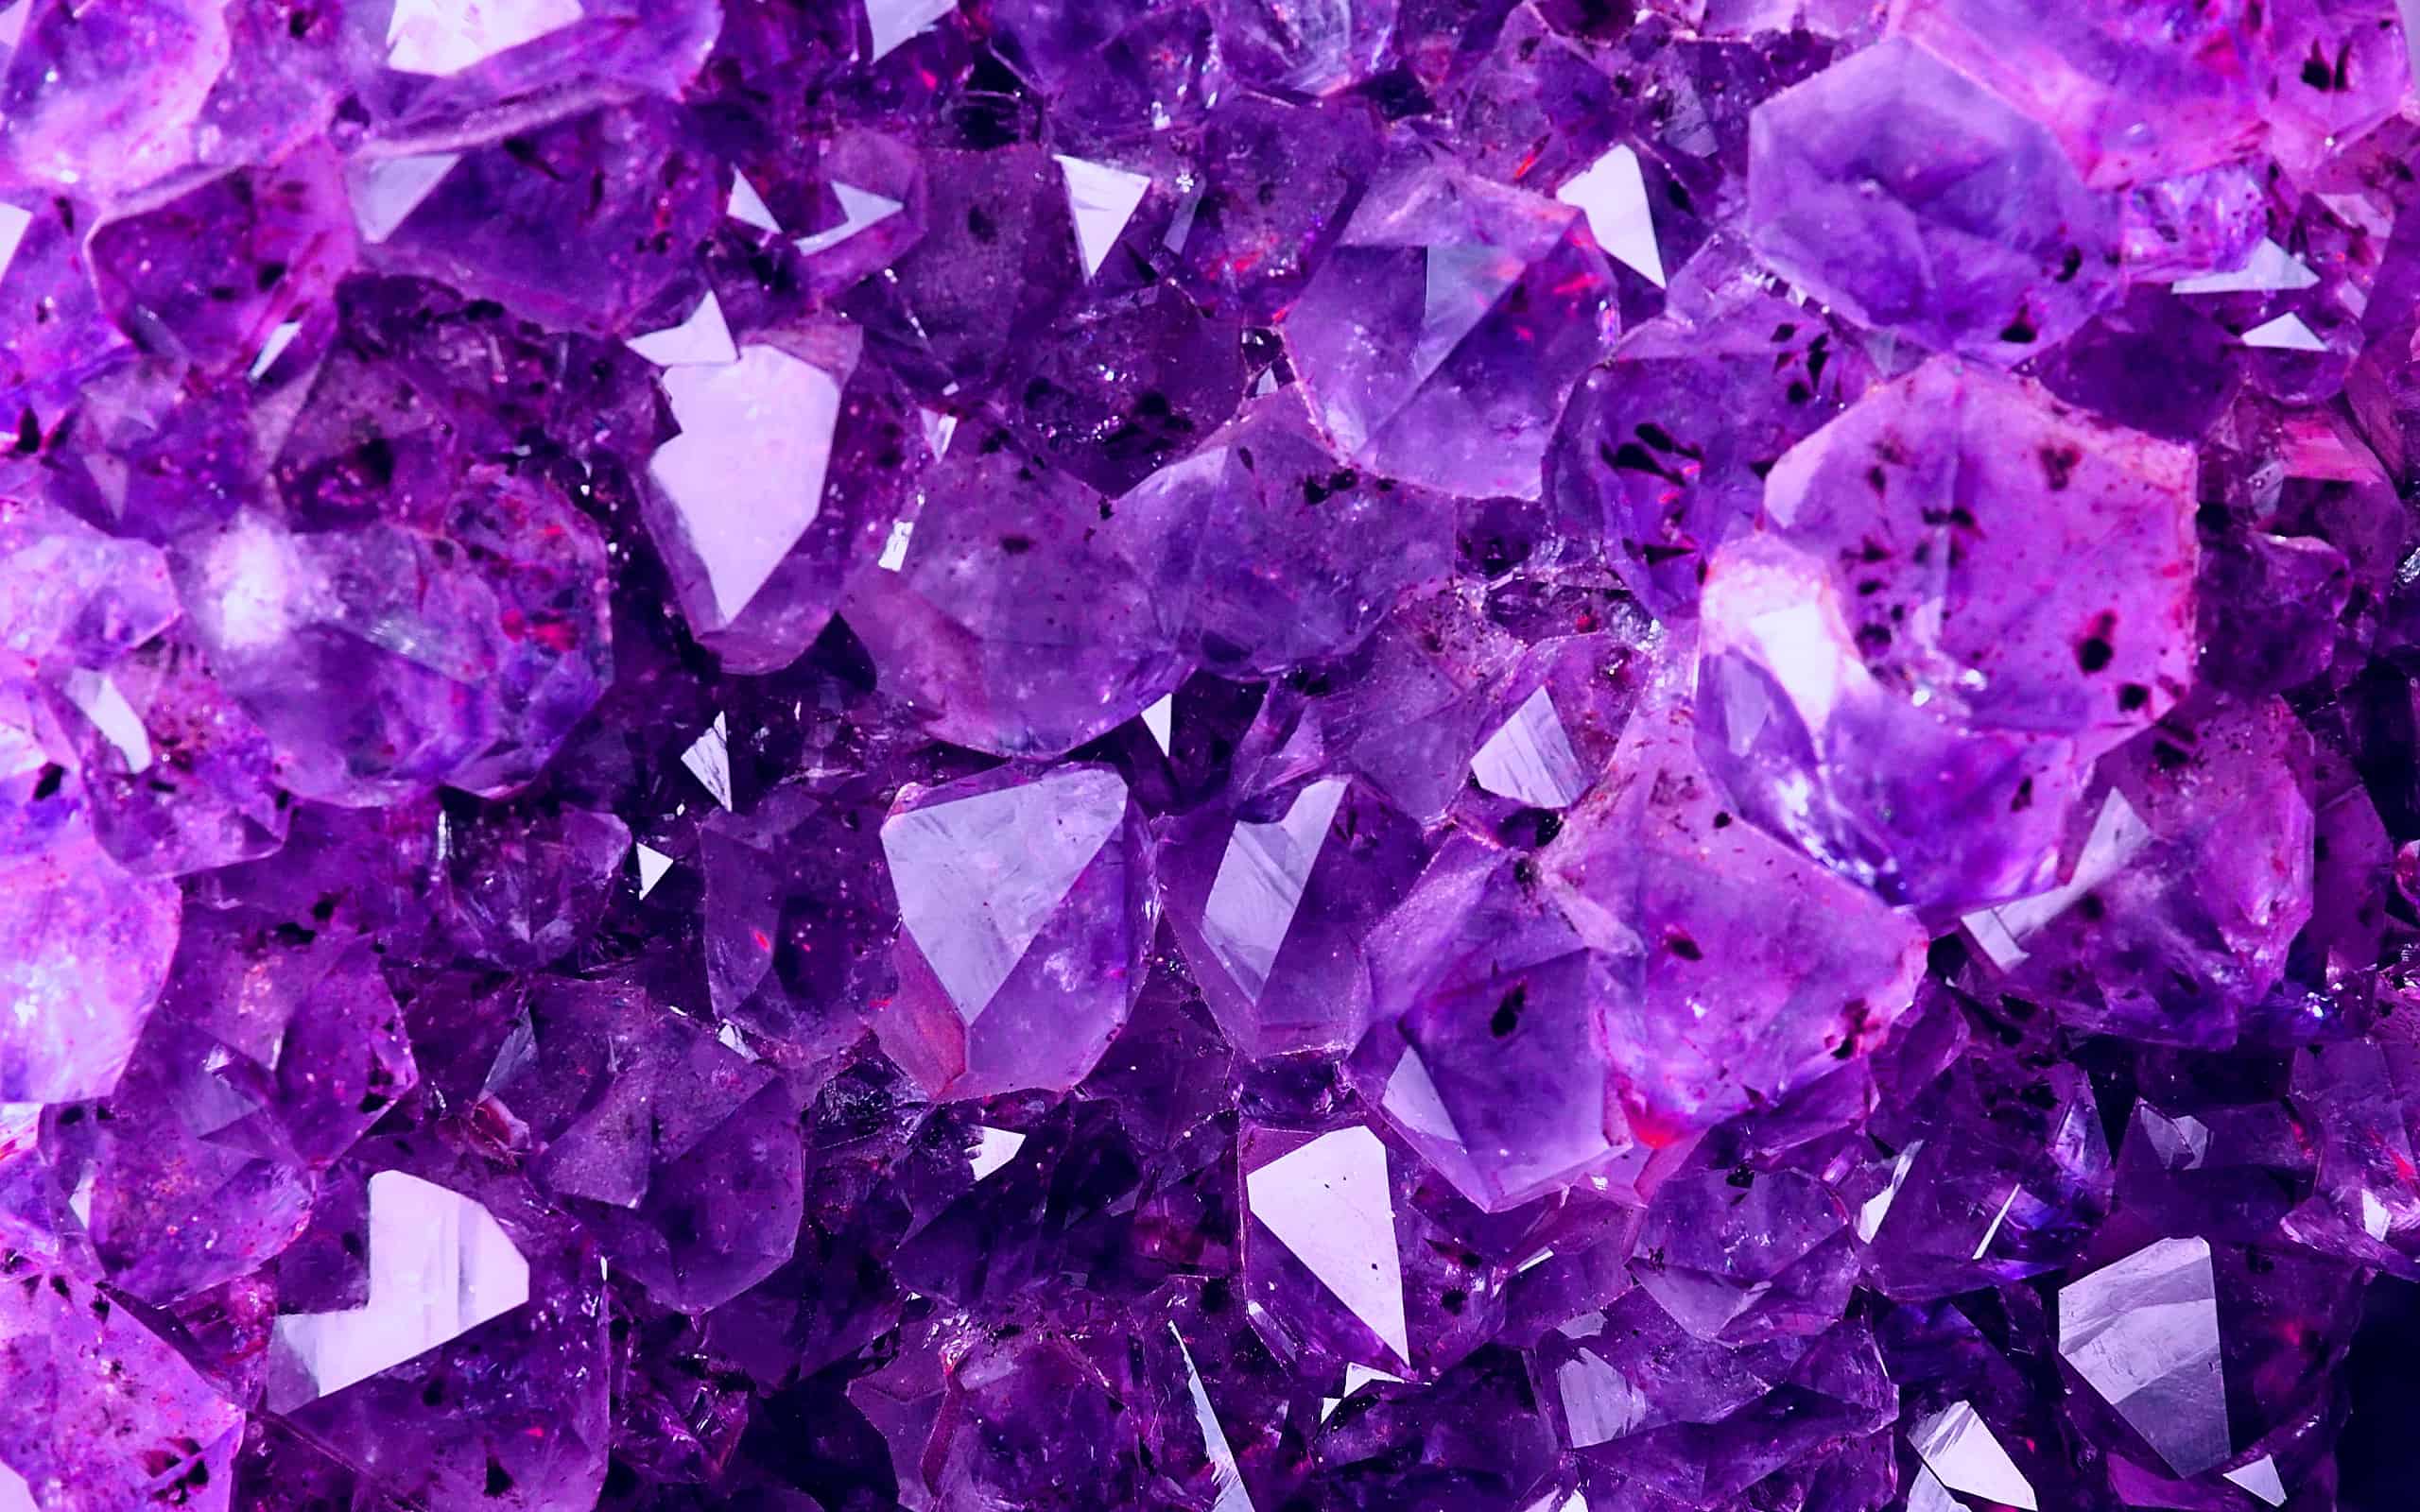 Bright Violet Texture from Natural Amethyst